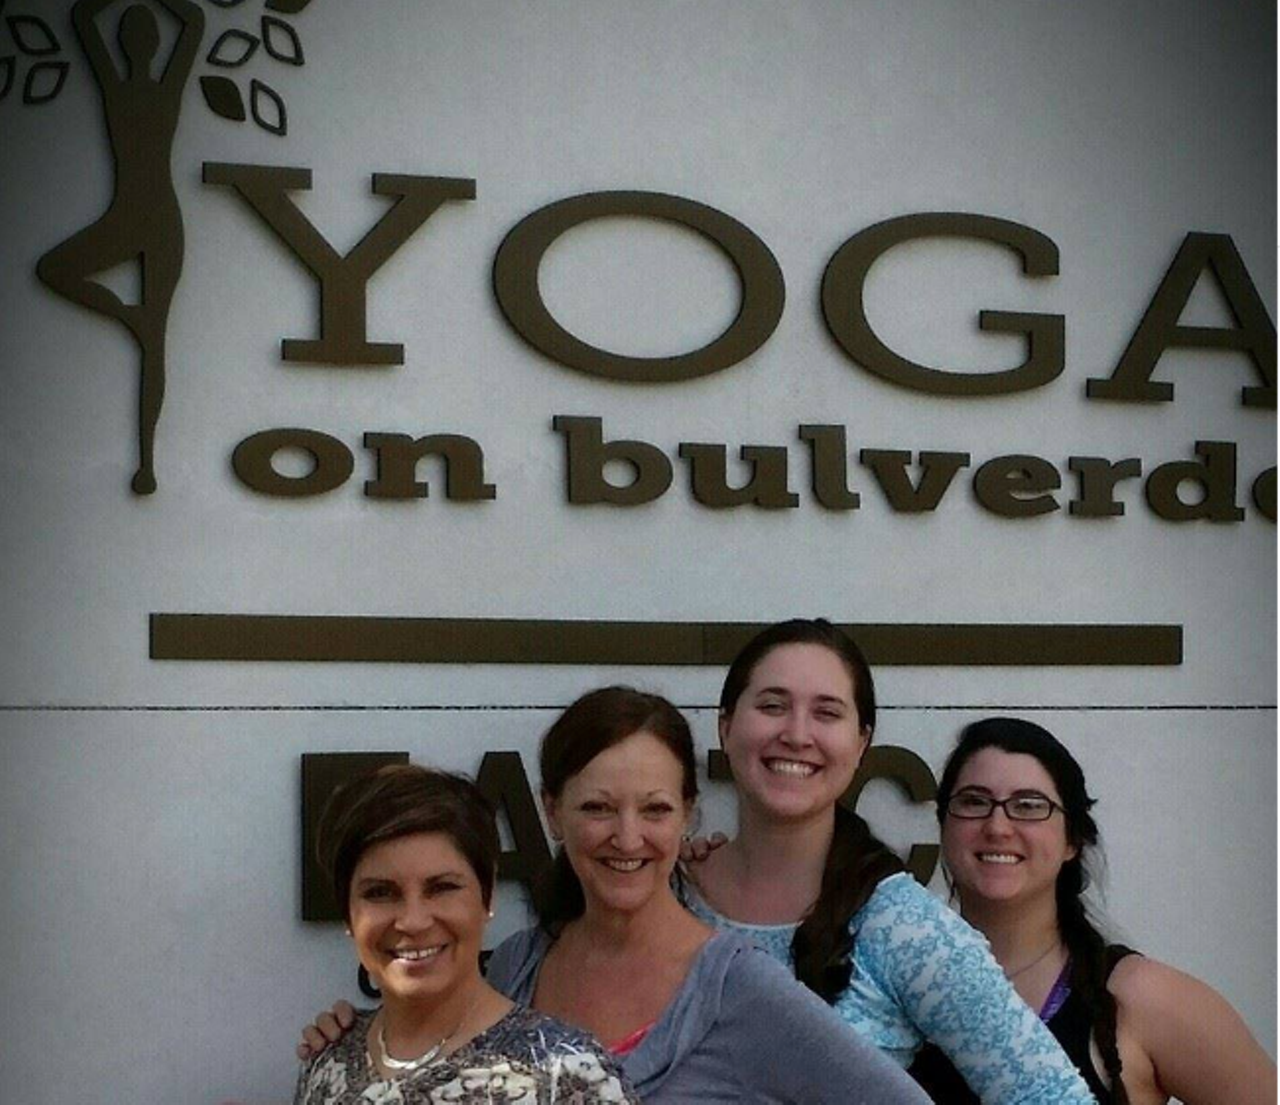 Yoga on Bulverde
26605 Bulverde Rd, (210) 812-2915
Let Yoga on Bulverde help with any body stiffness and allow your stress melt away with one of the many classes offered at this studio.
Photo via Facebook/Yoga on Boulverde